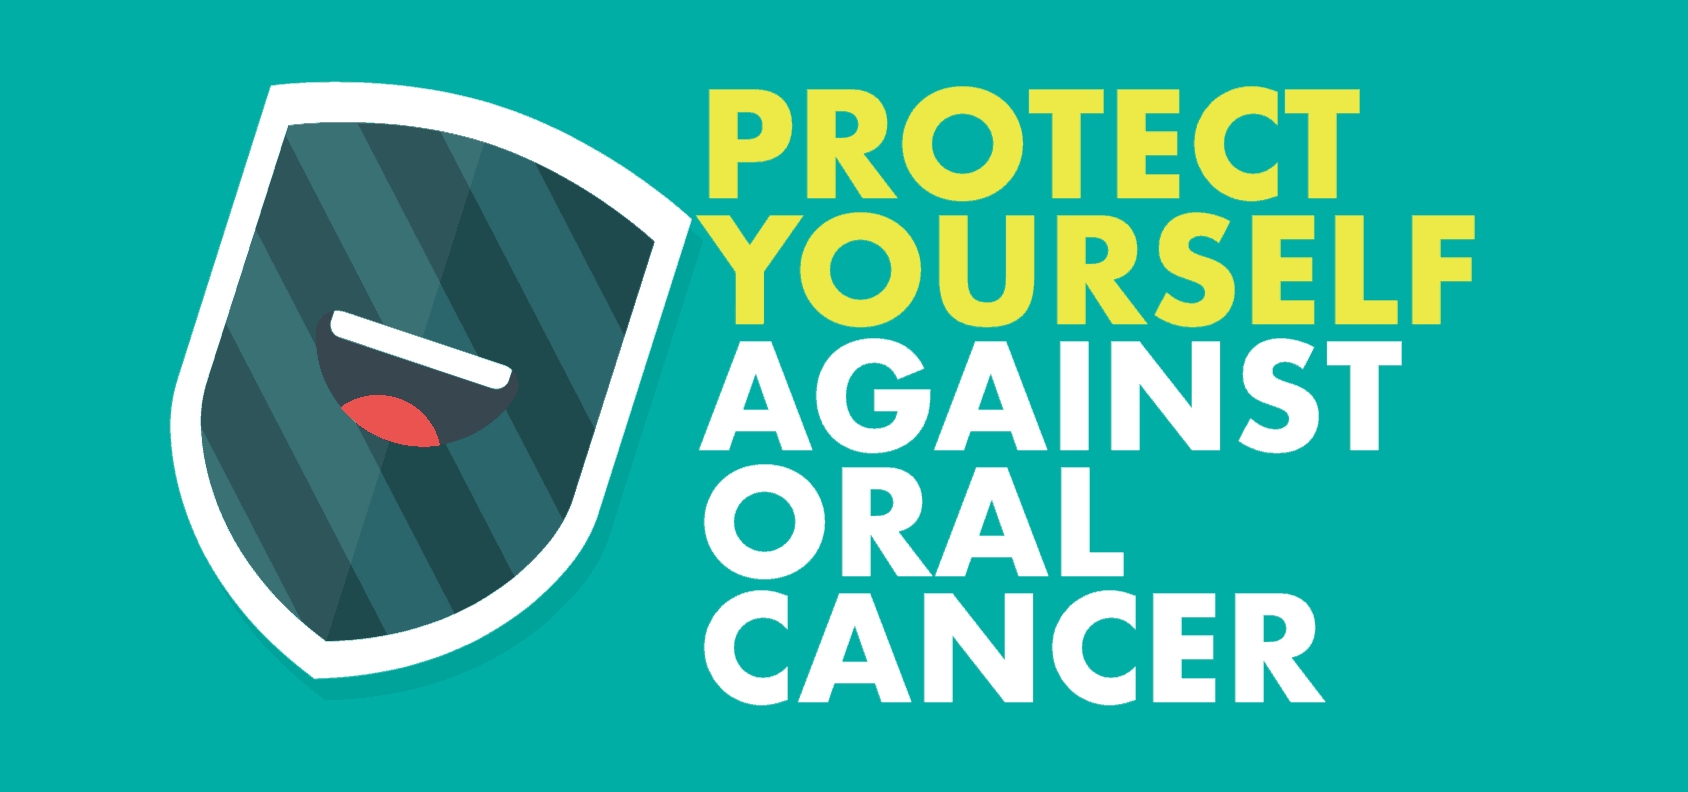 Protect Yourself Against Oral Cancer banner